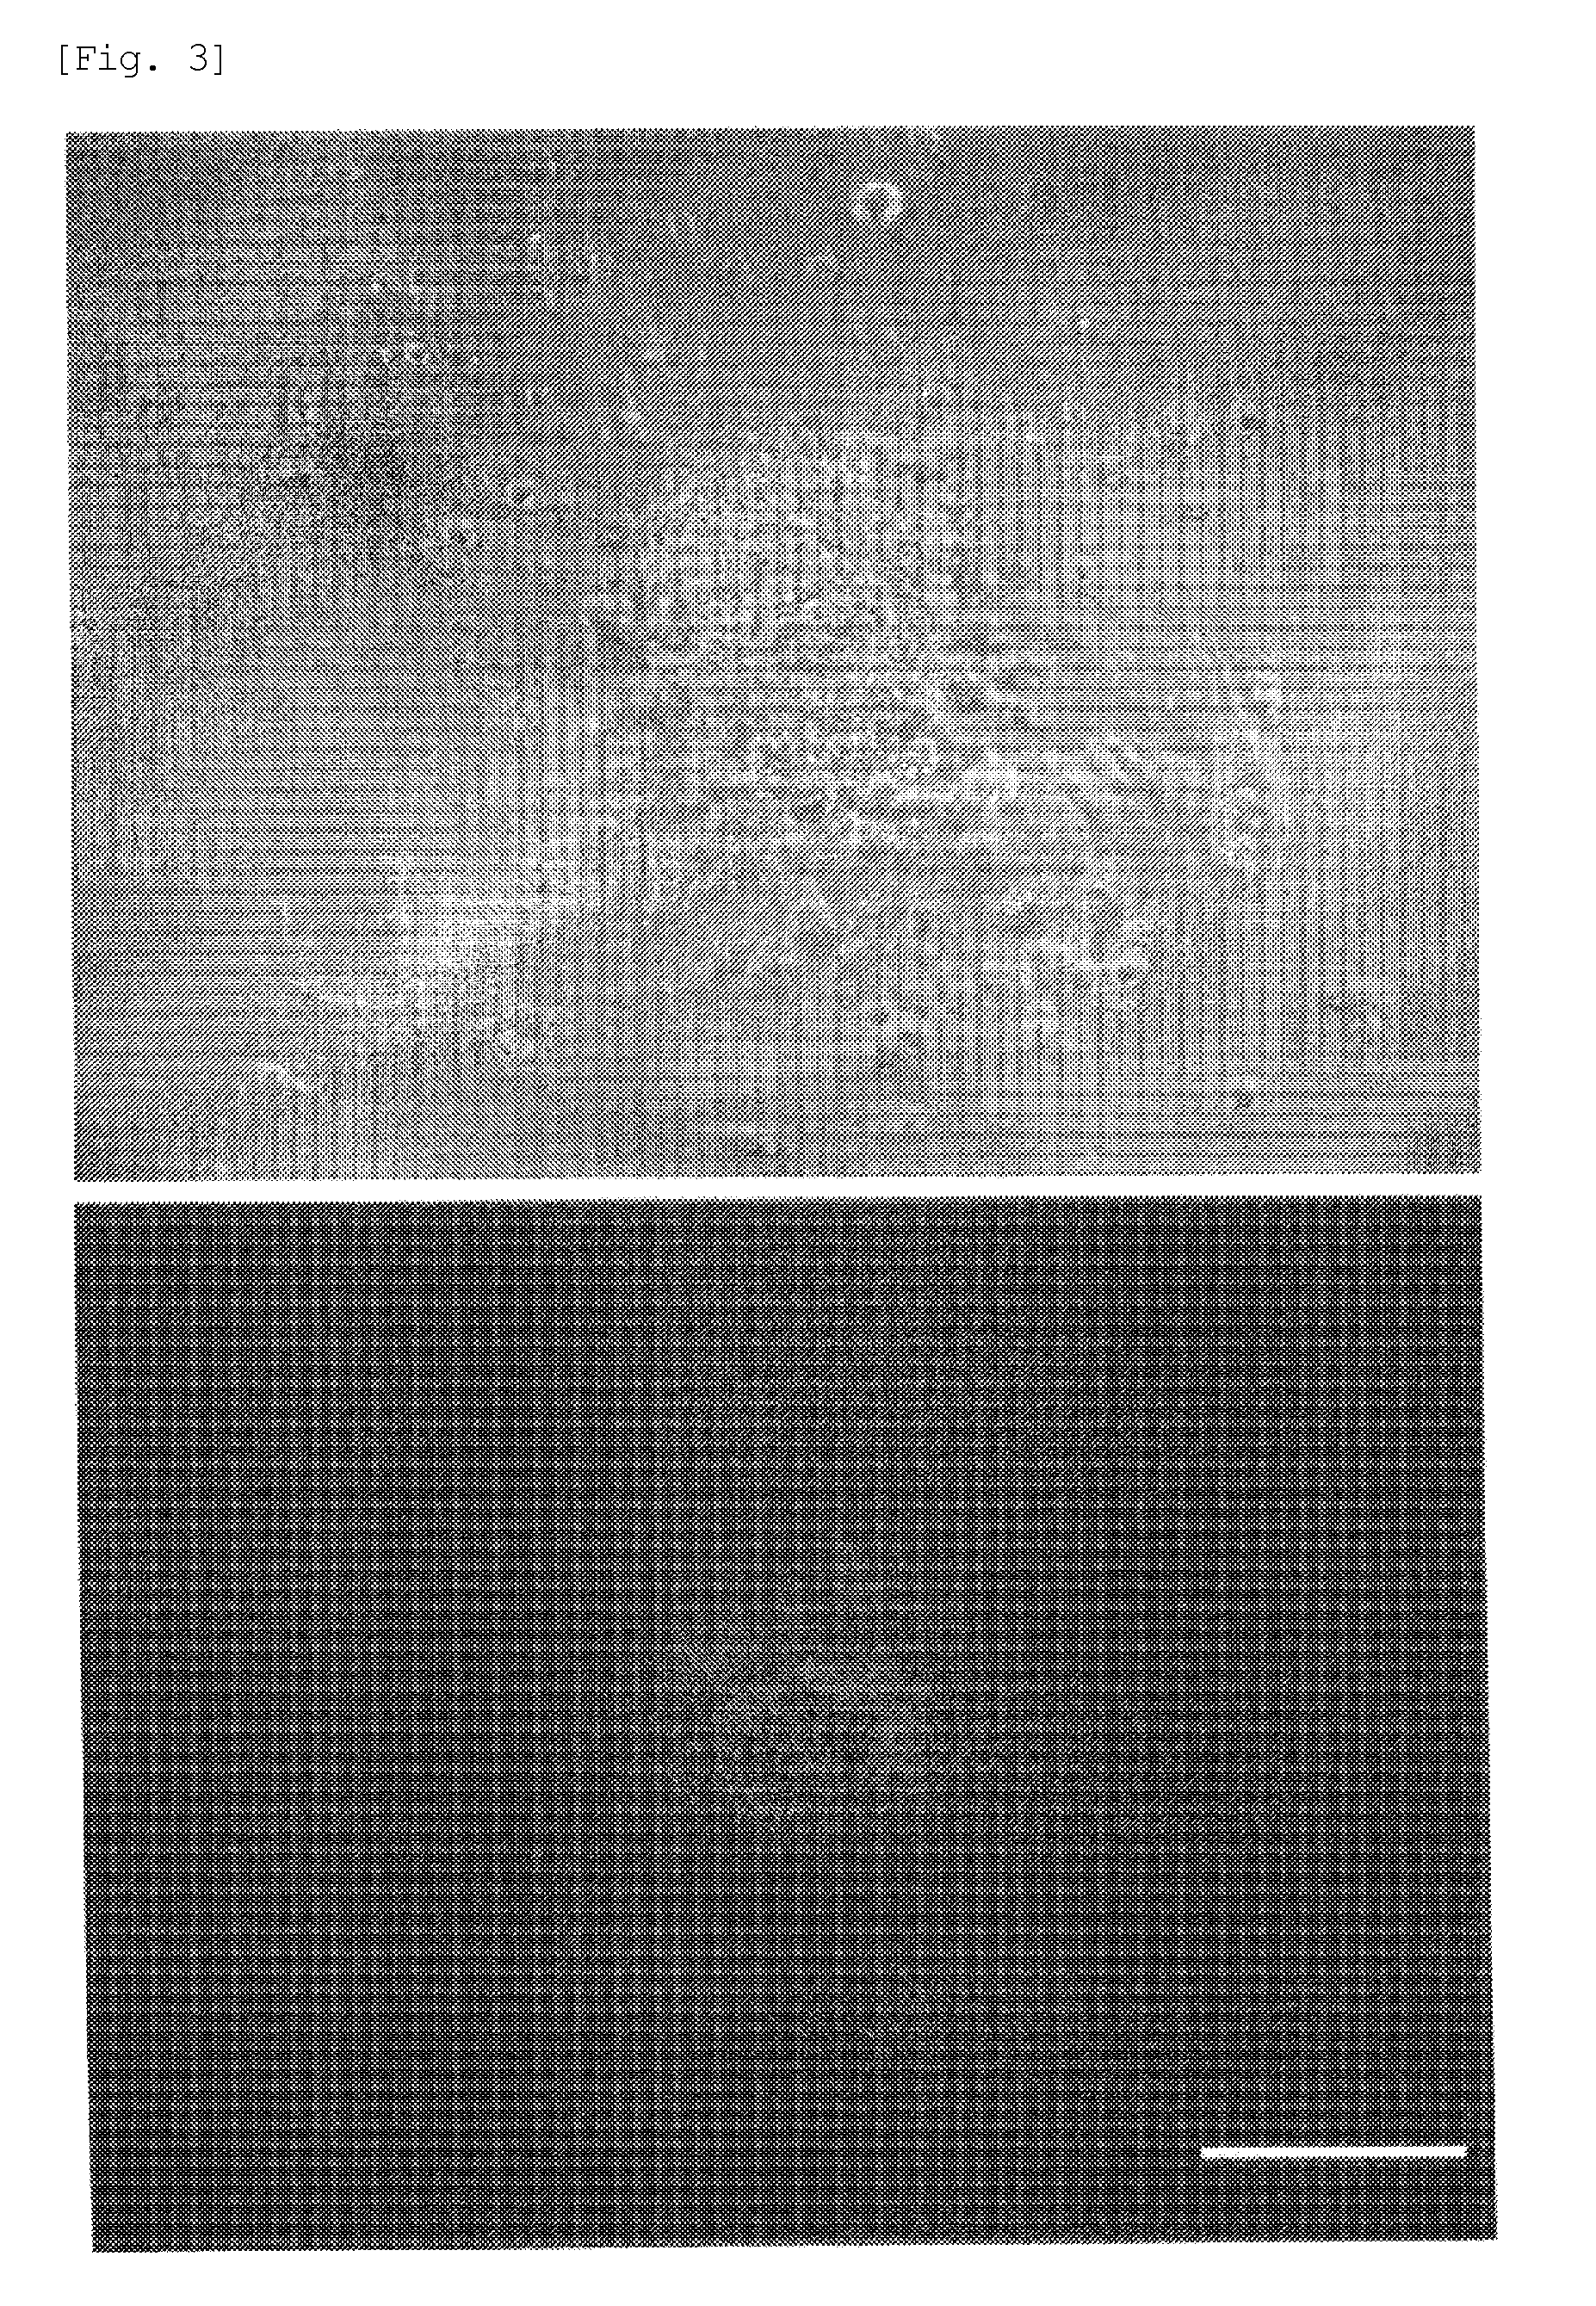 Method for producing induced pluripotent stem cells